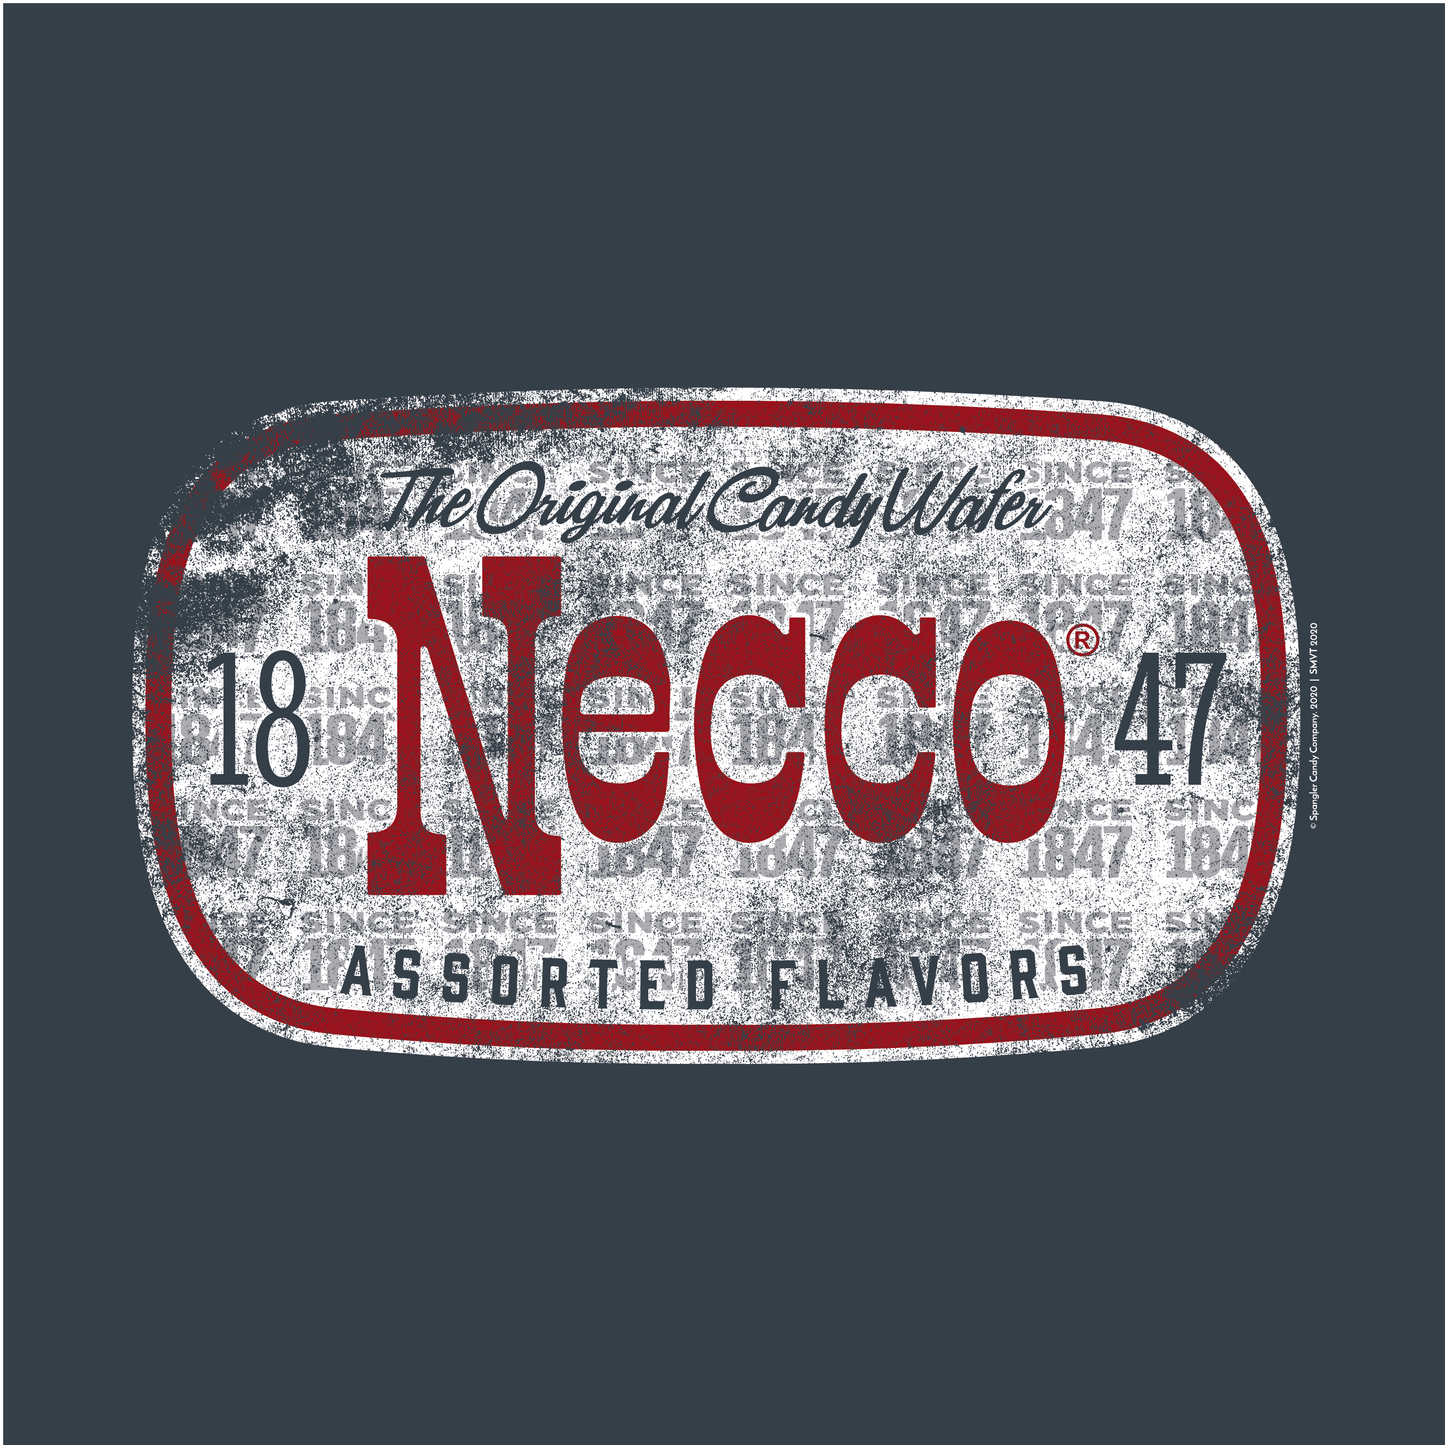 NECCO® The Original Candy Wafer | Vintage USA Candy Tee | Boston Tshirt